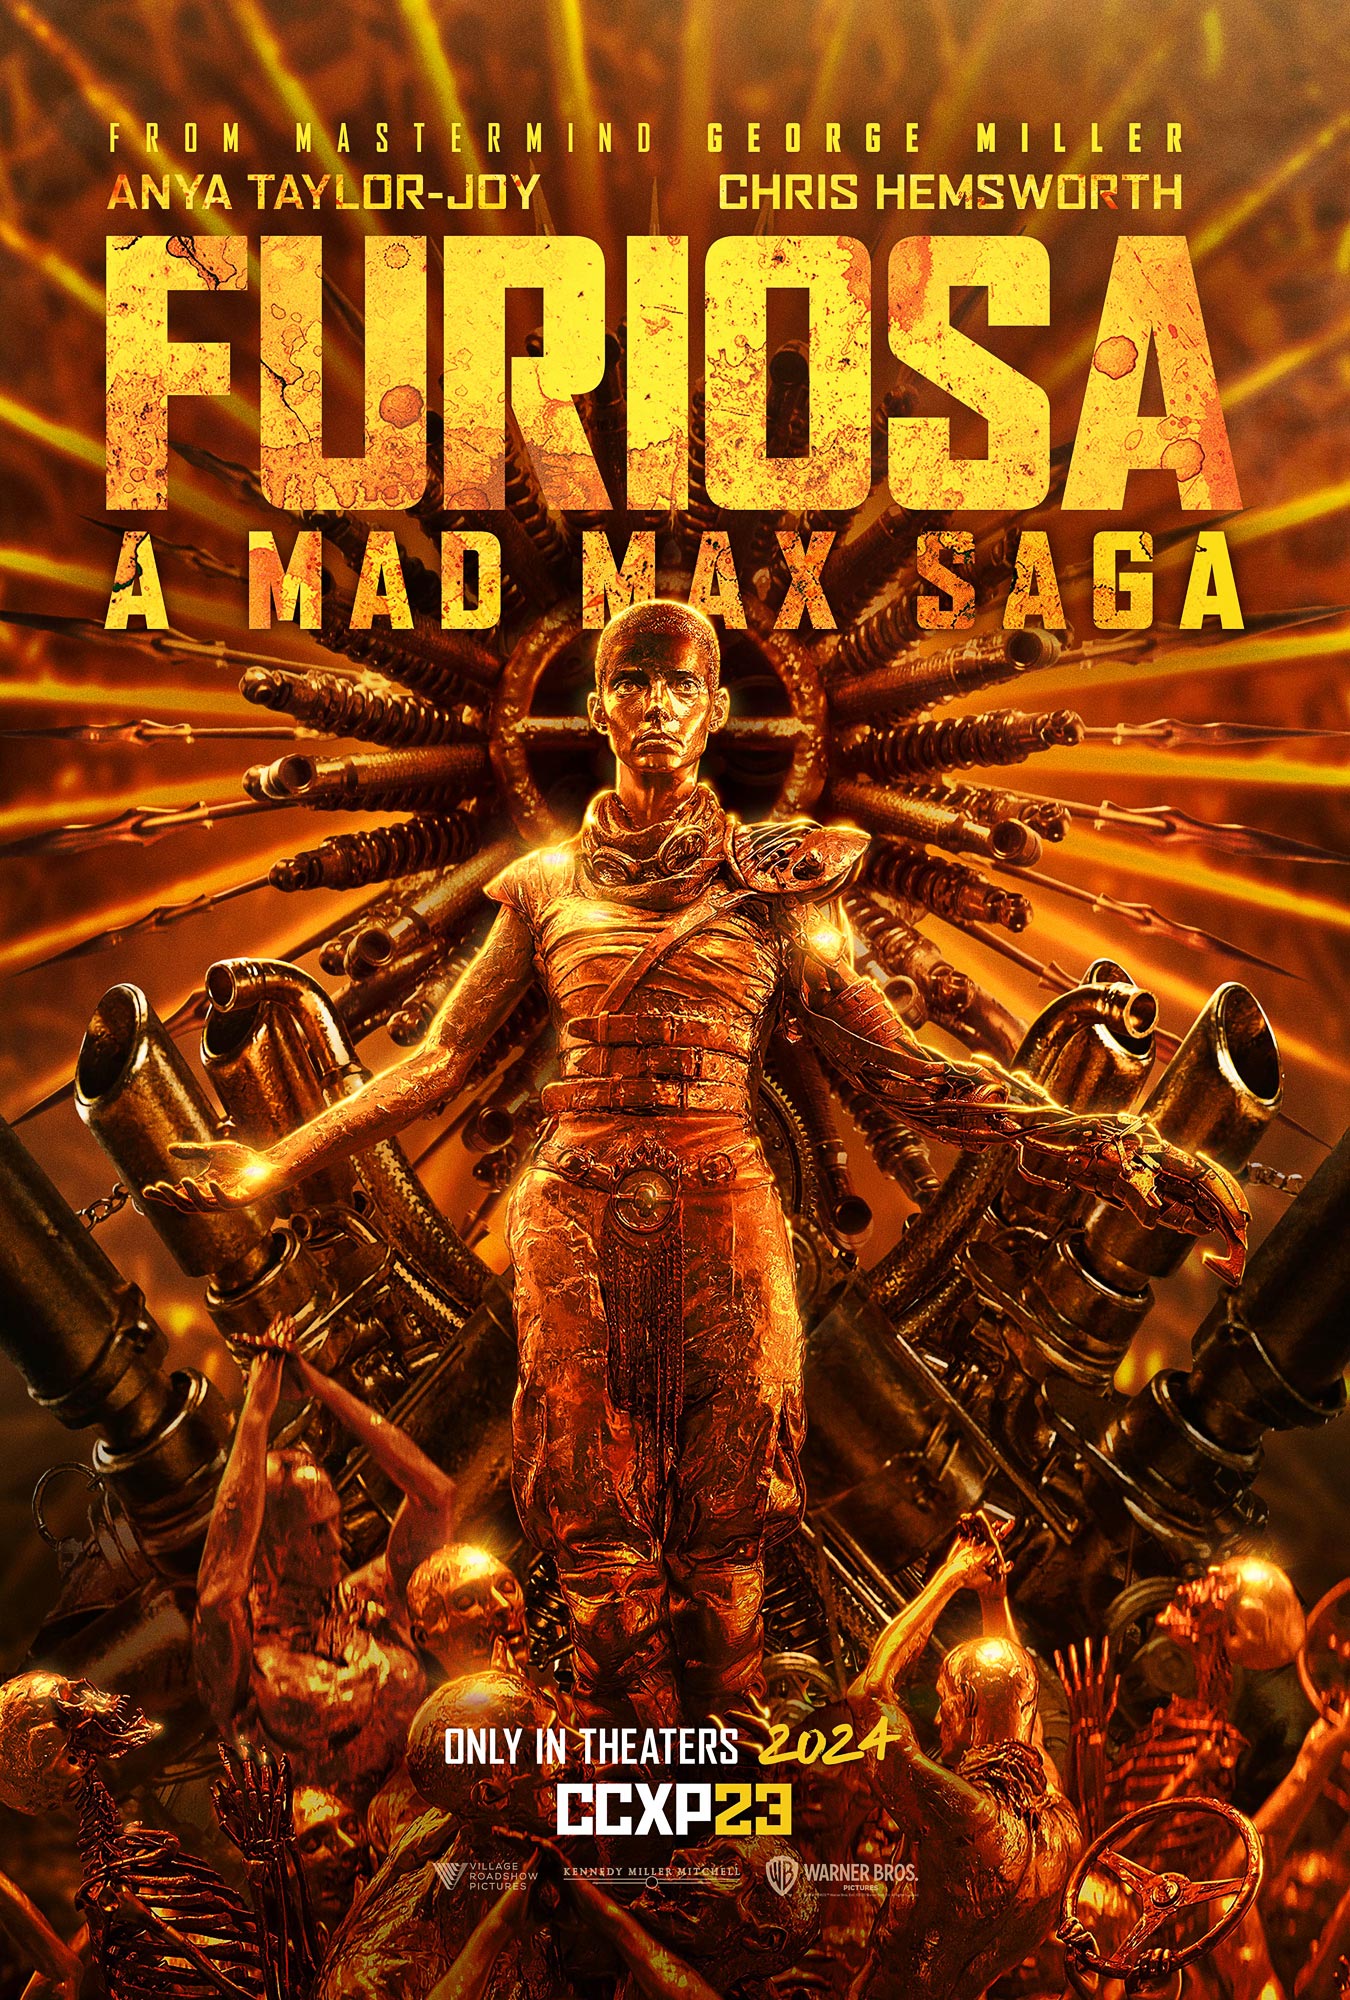 Everything to Know About Furiosa the Mad Max Fury Road Prequel Starring Anya Taylor Joy 884